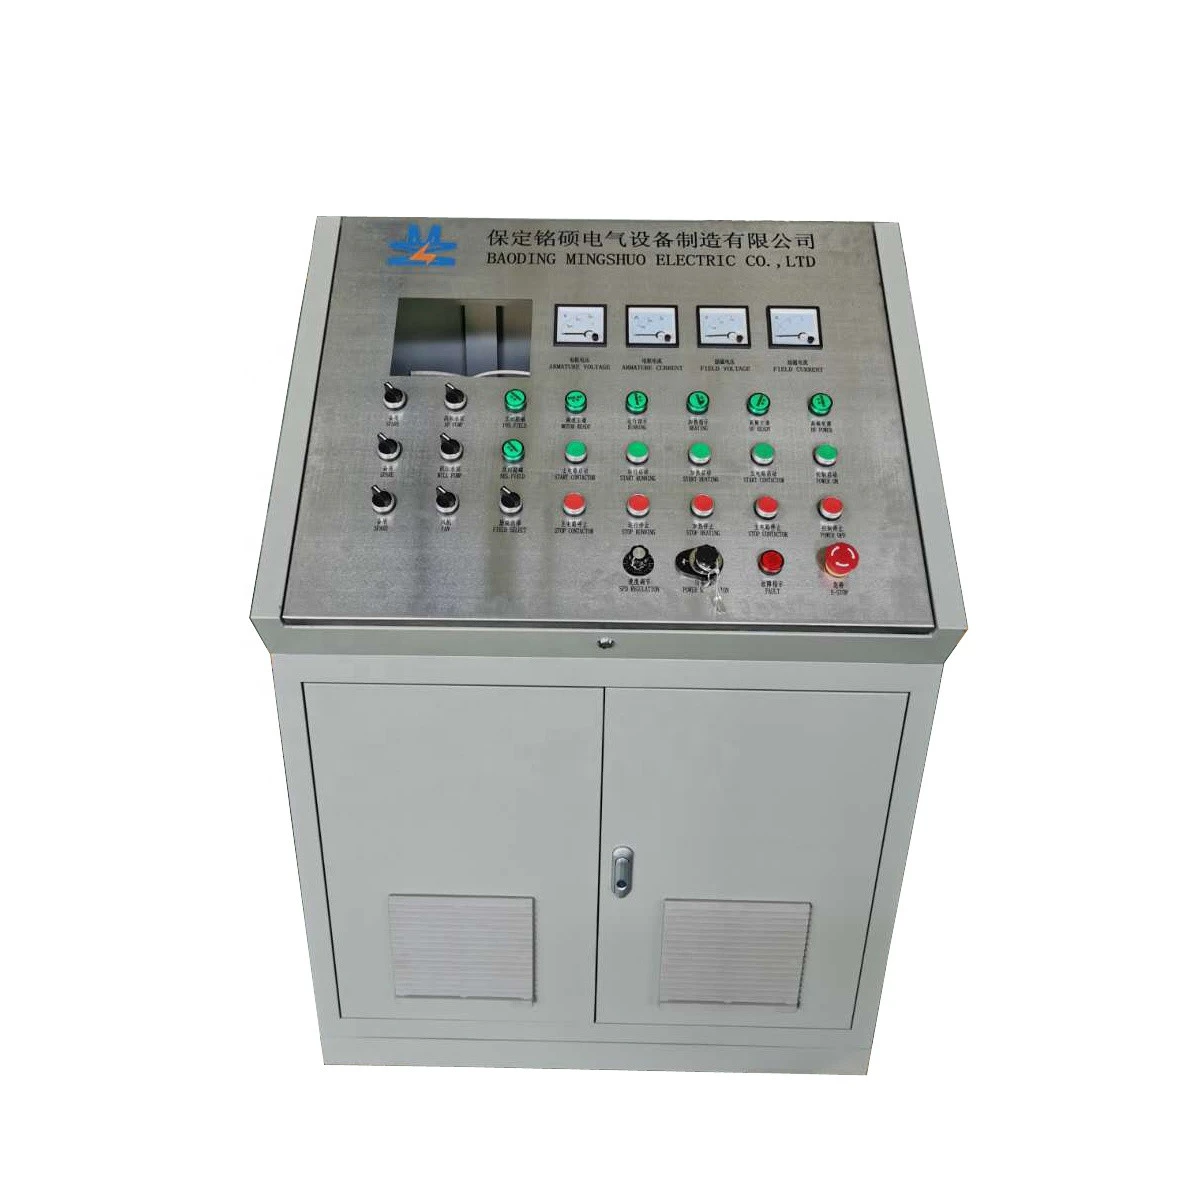 central console with DC drive cabinet into one cabinet to computer control tube mill speed Euro Drive series All digital